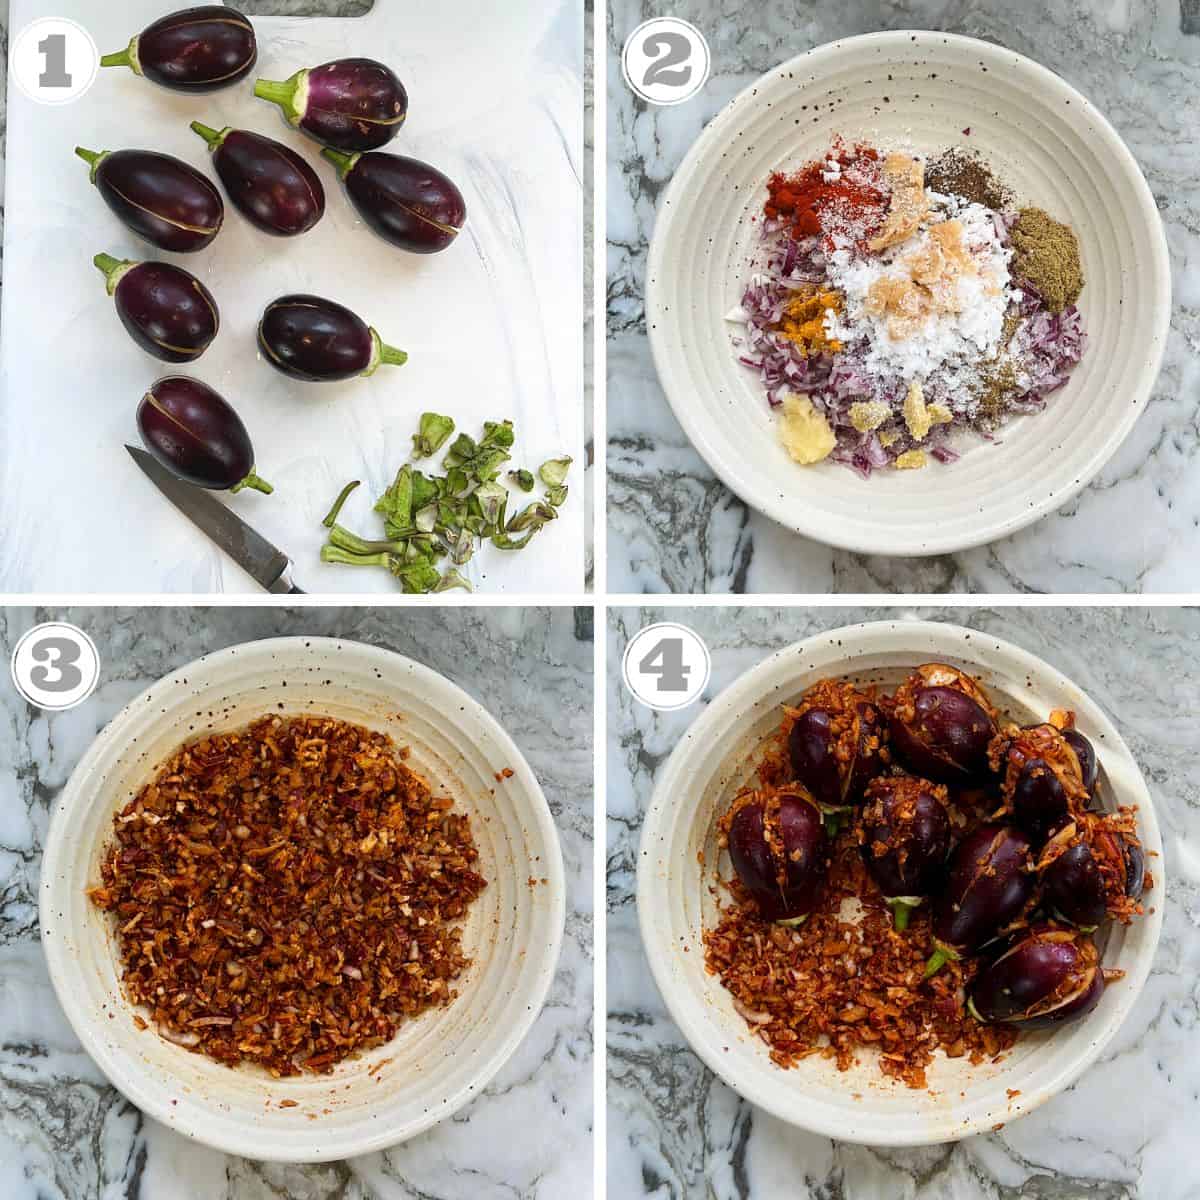 steps one through four showing how to prep eggplants and filling for stuffed curried eggplant 